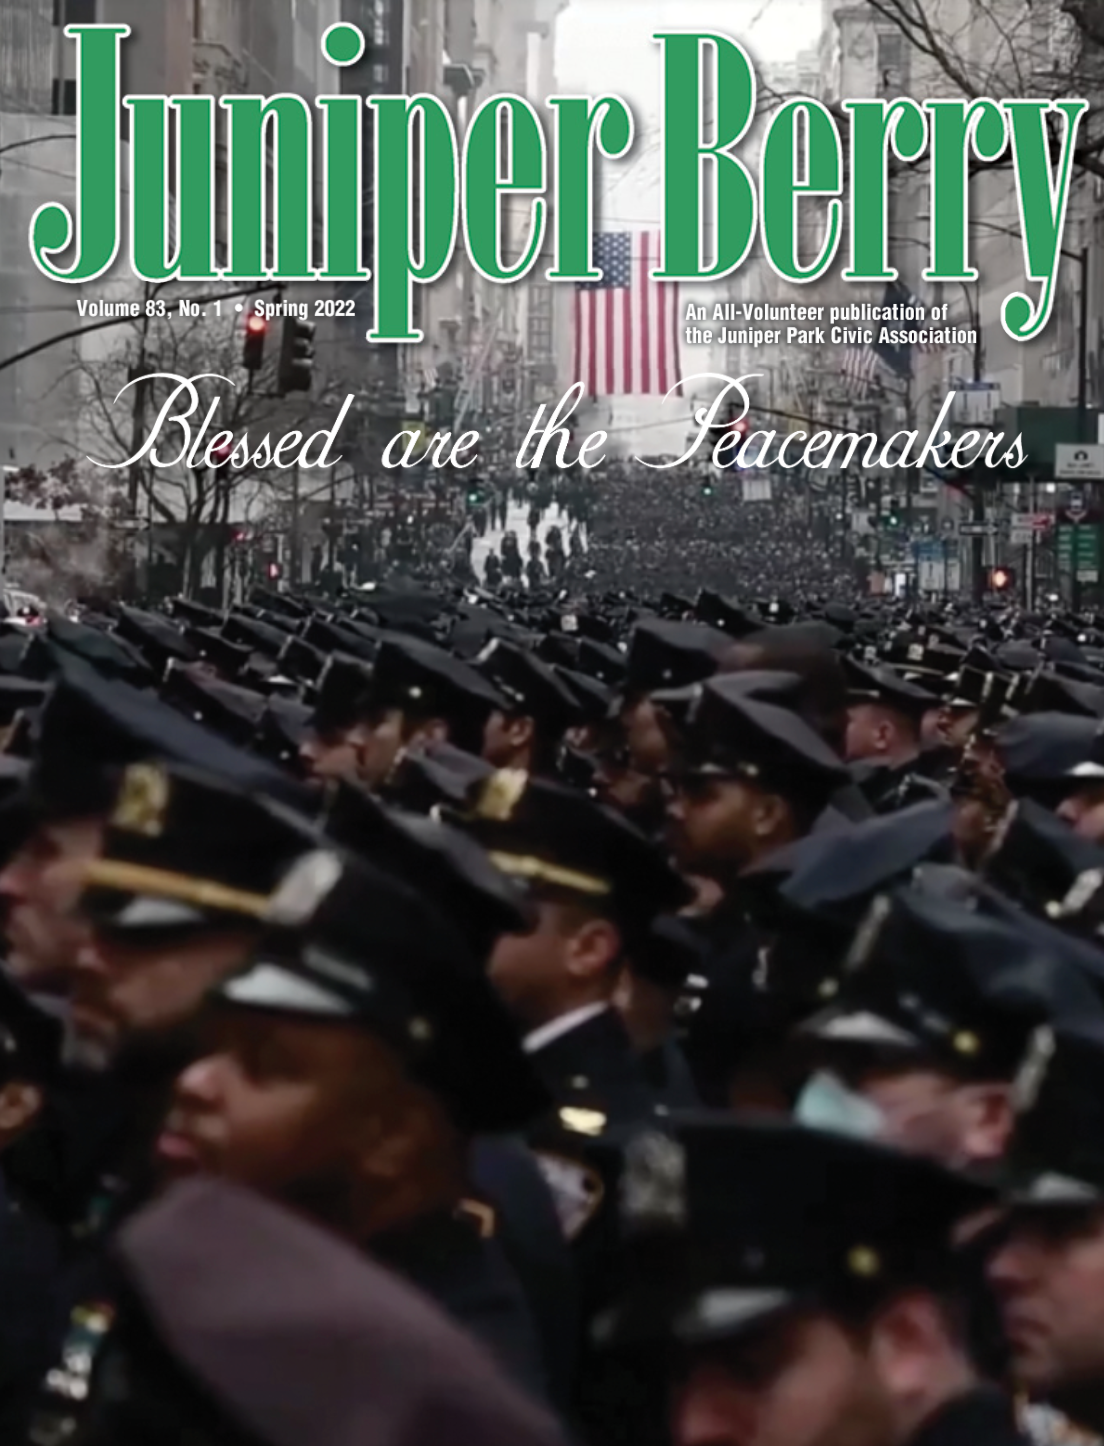 The Juniper Berry March 2022 Cover